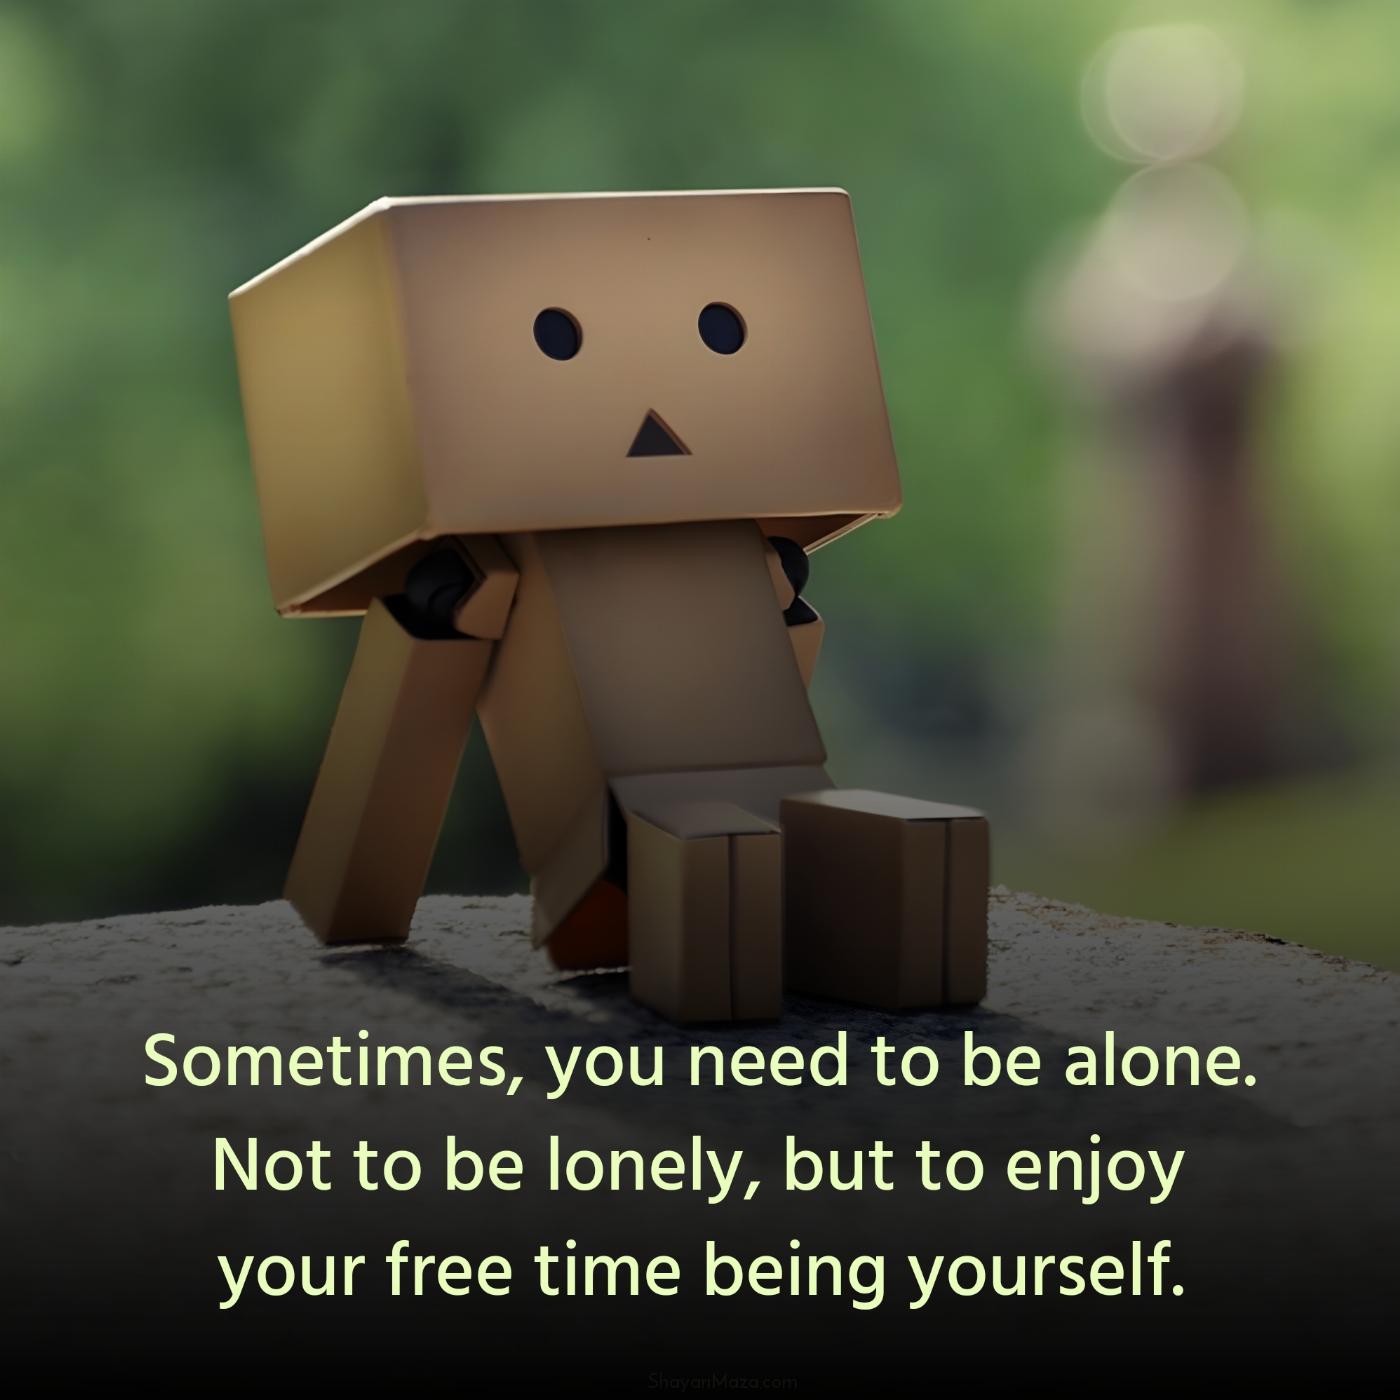 Sometimes you need to be alone Not to be lonely